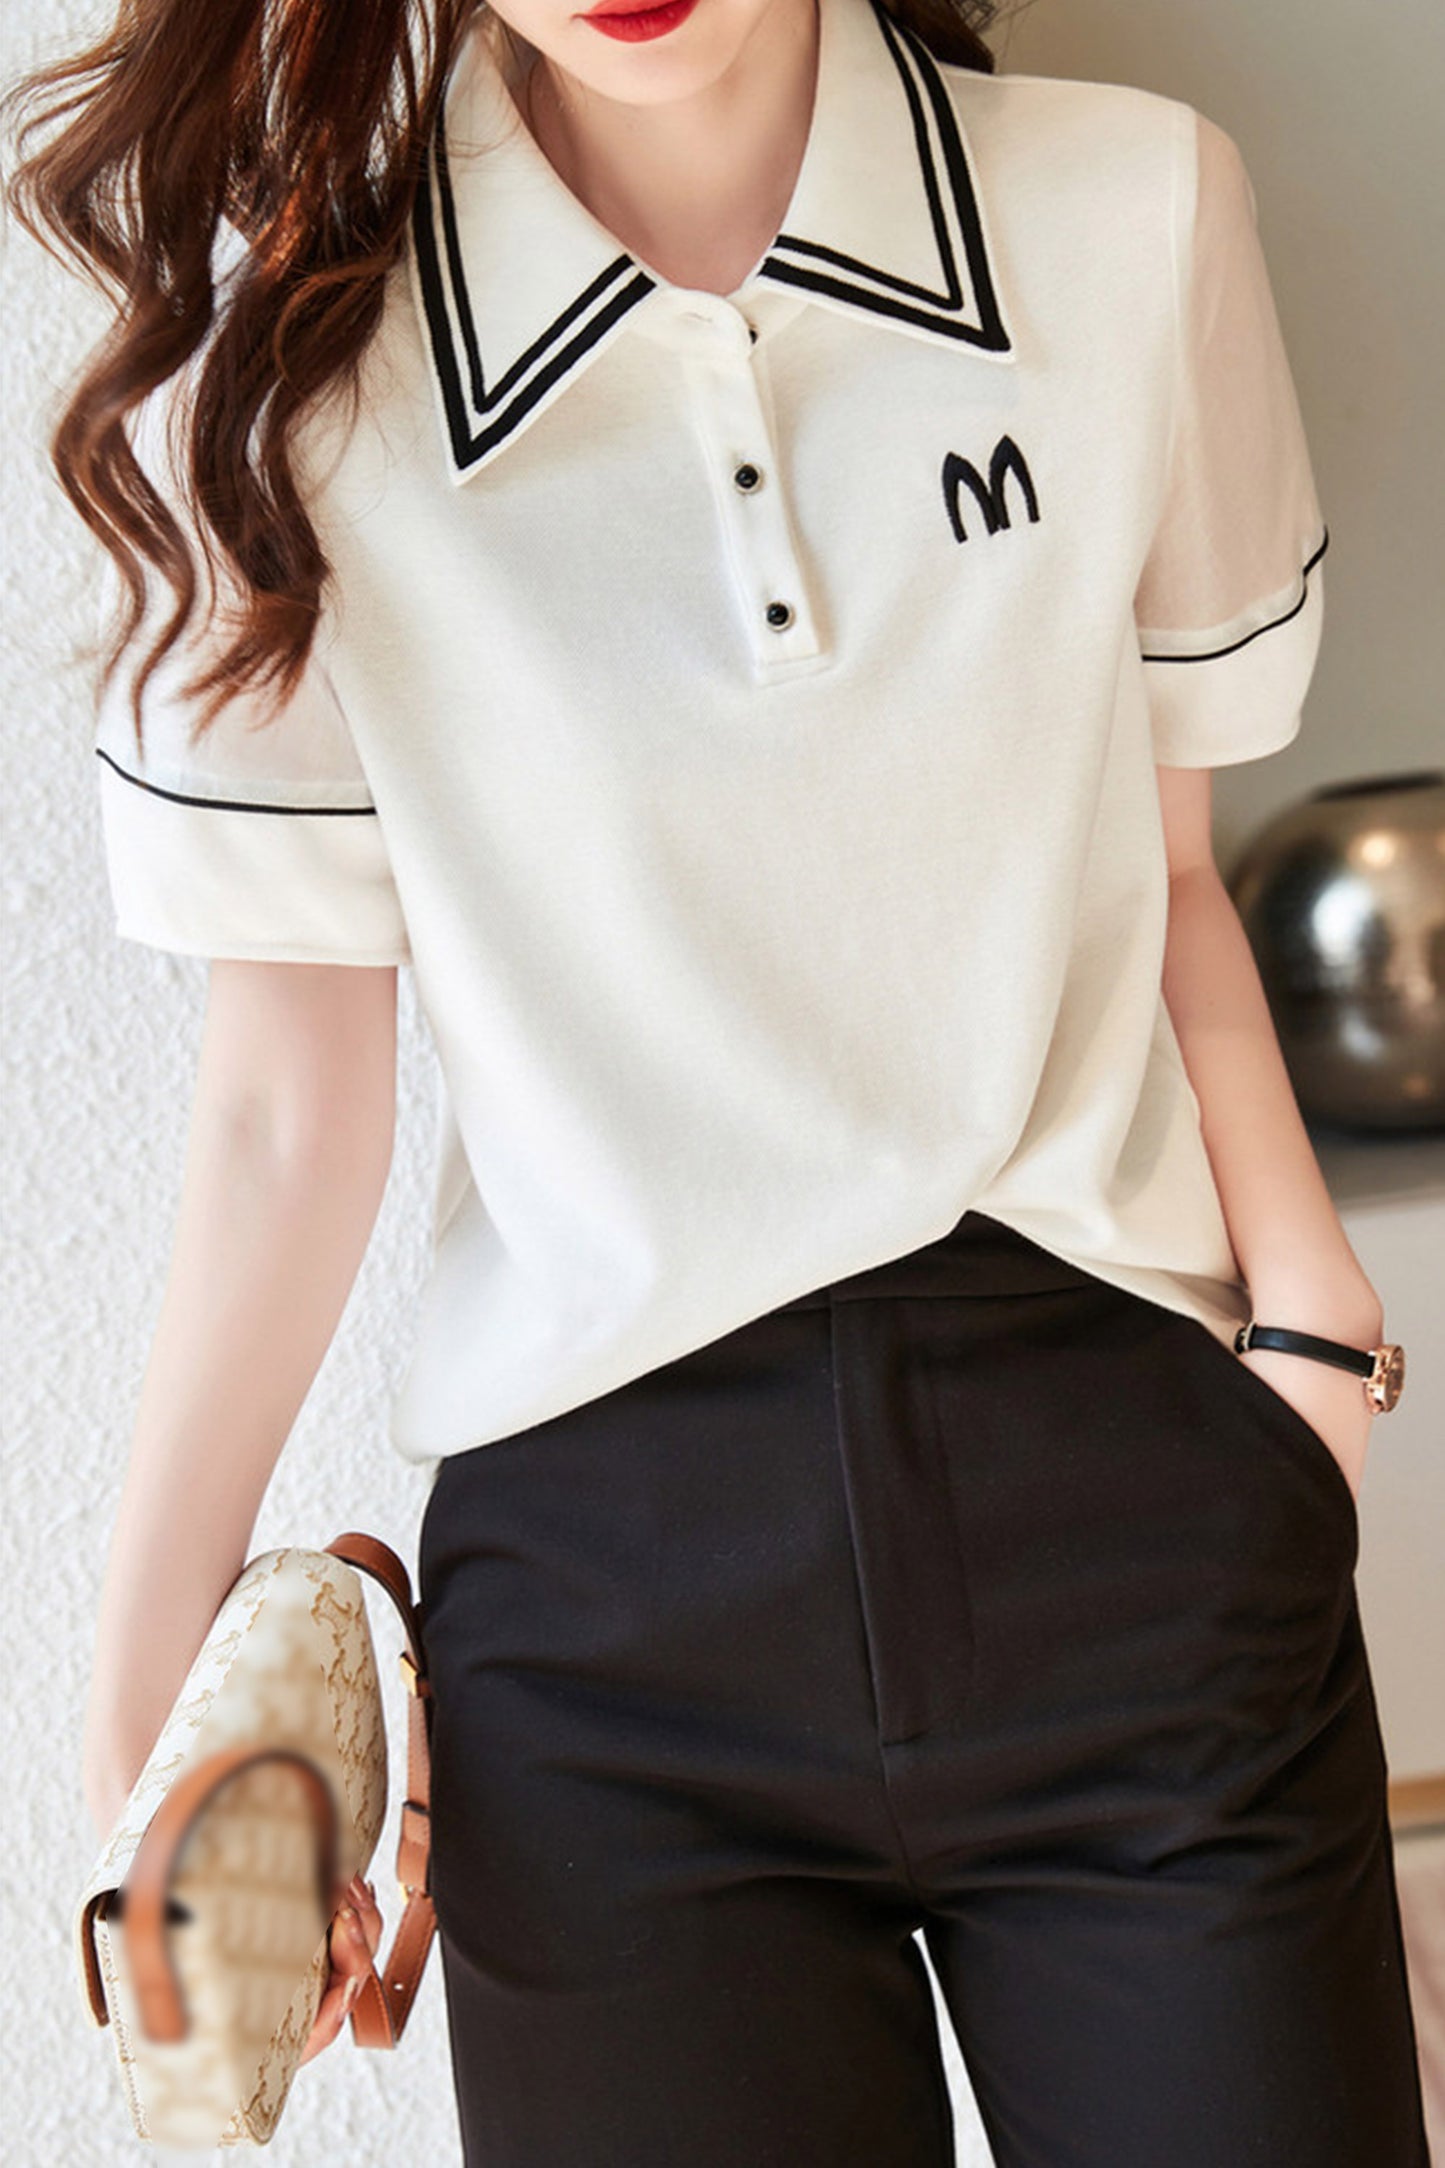 Embroidered Printed Knit Short Sleeve Polo T-Shirts